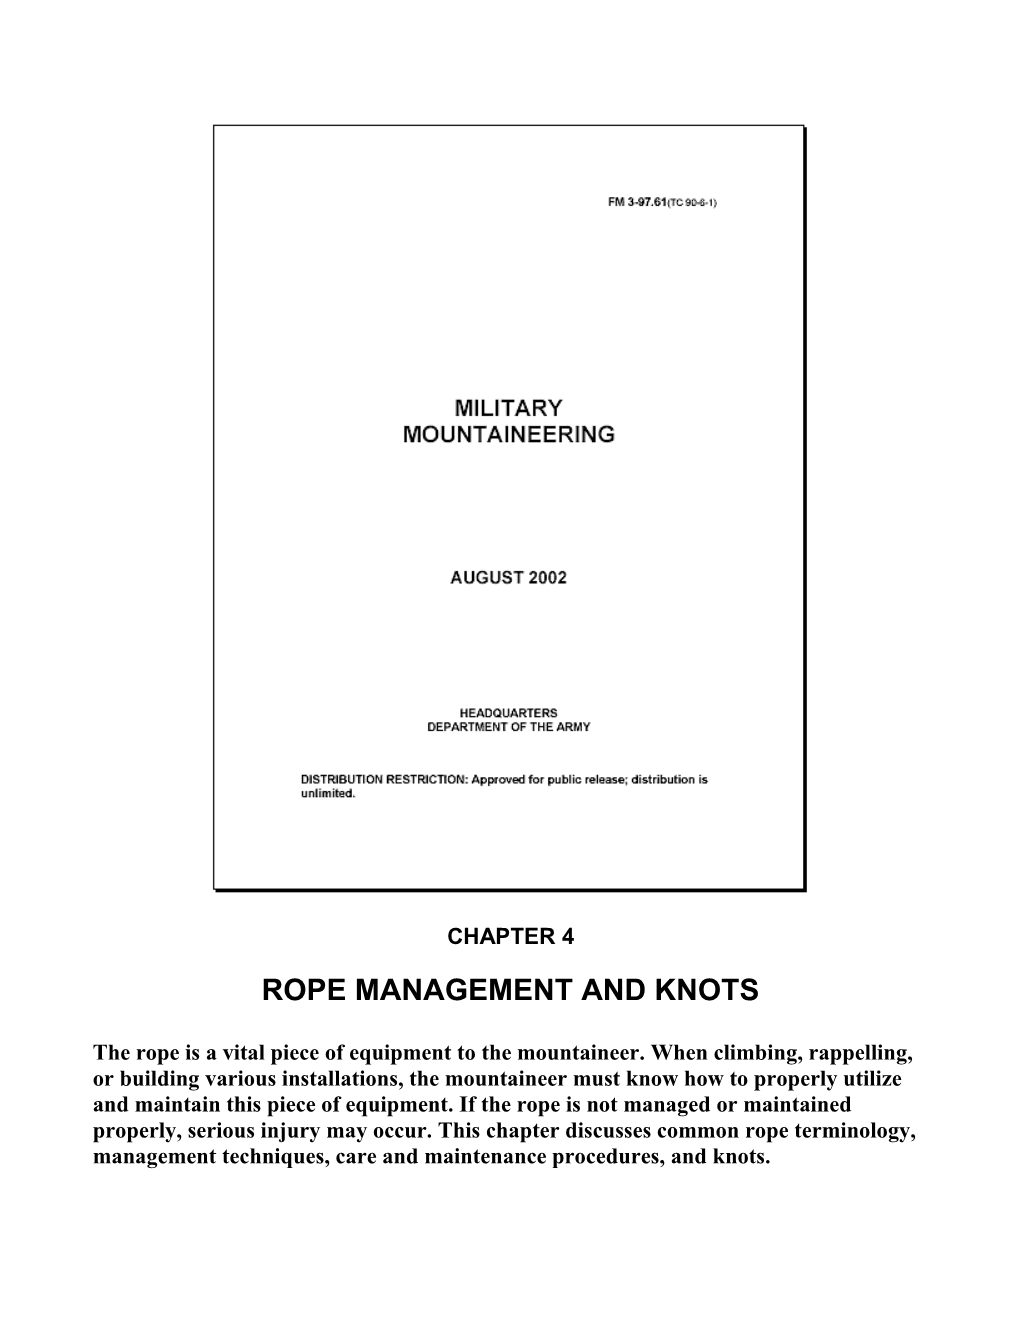 Rope Management and Knots